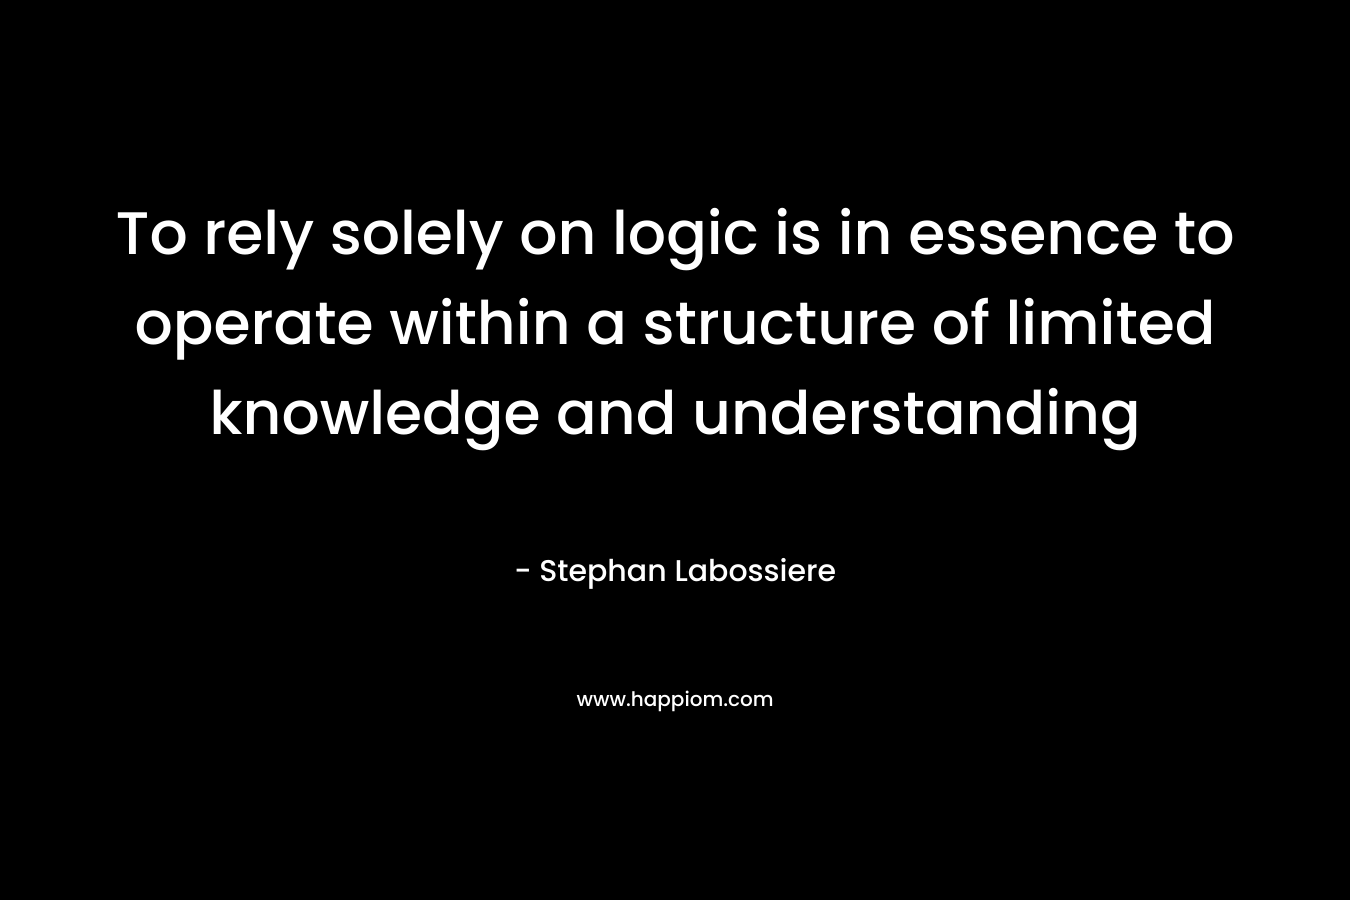 To rely solely on logic is in essence to operate within a structure of limited knowledge and understanding